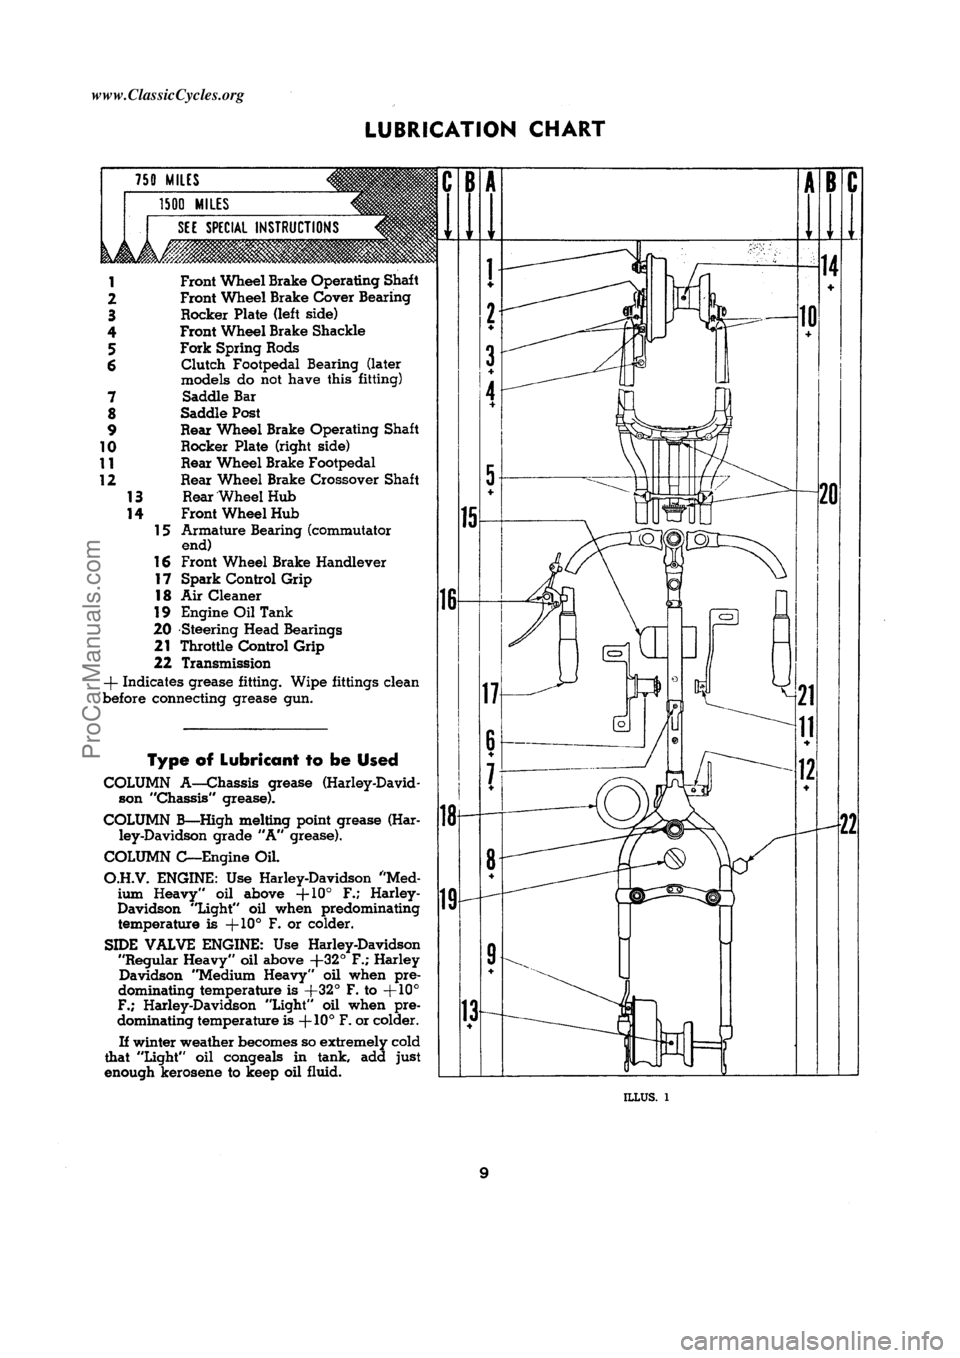 HARLEY-DAVIDSON KNUCKLEHEAD 1940  Service Manual  [9]ProCarManuals.com     www.ClassicCycles.org  